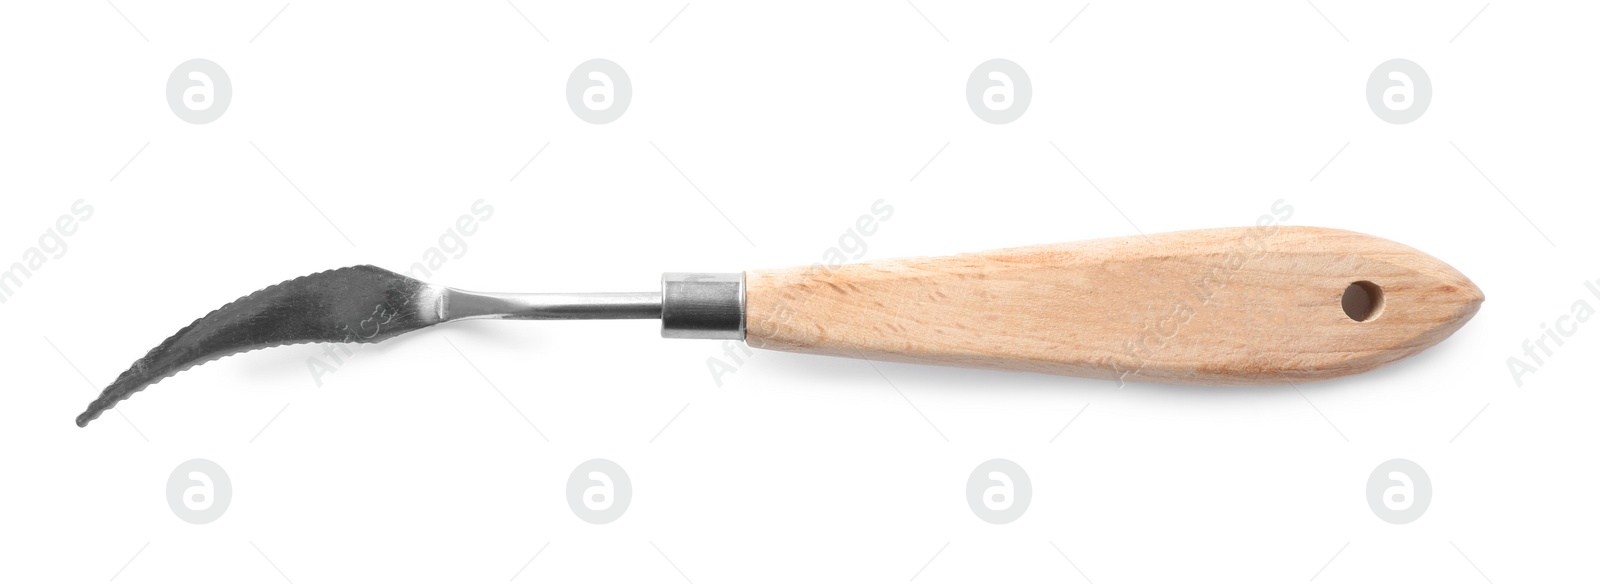 Photo of Hooked skiving knife for leather working isolated on white, top view